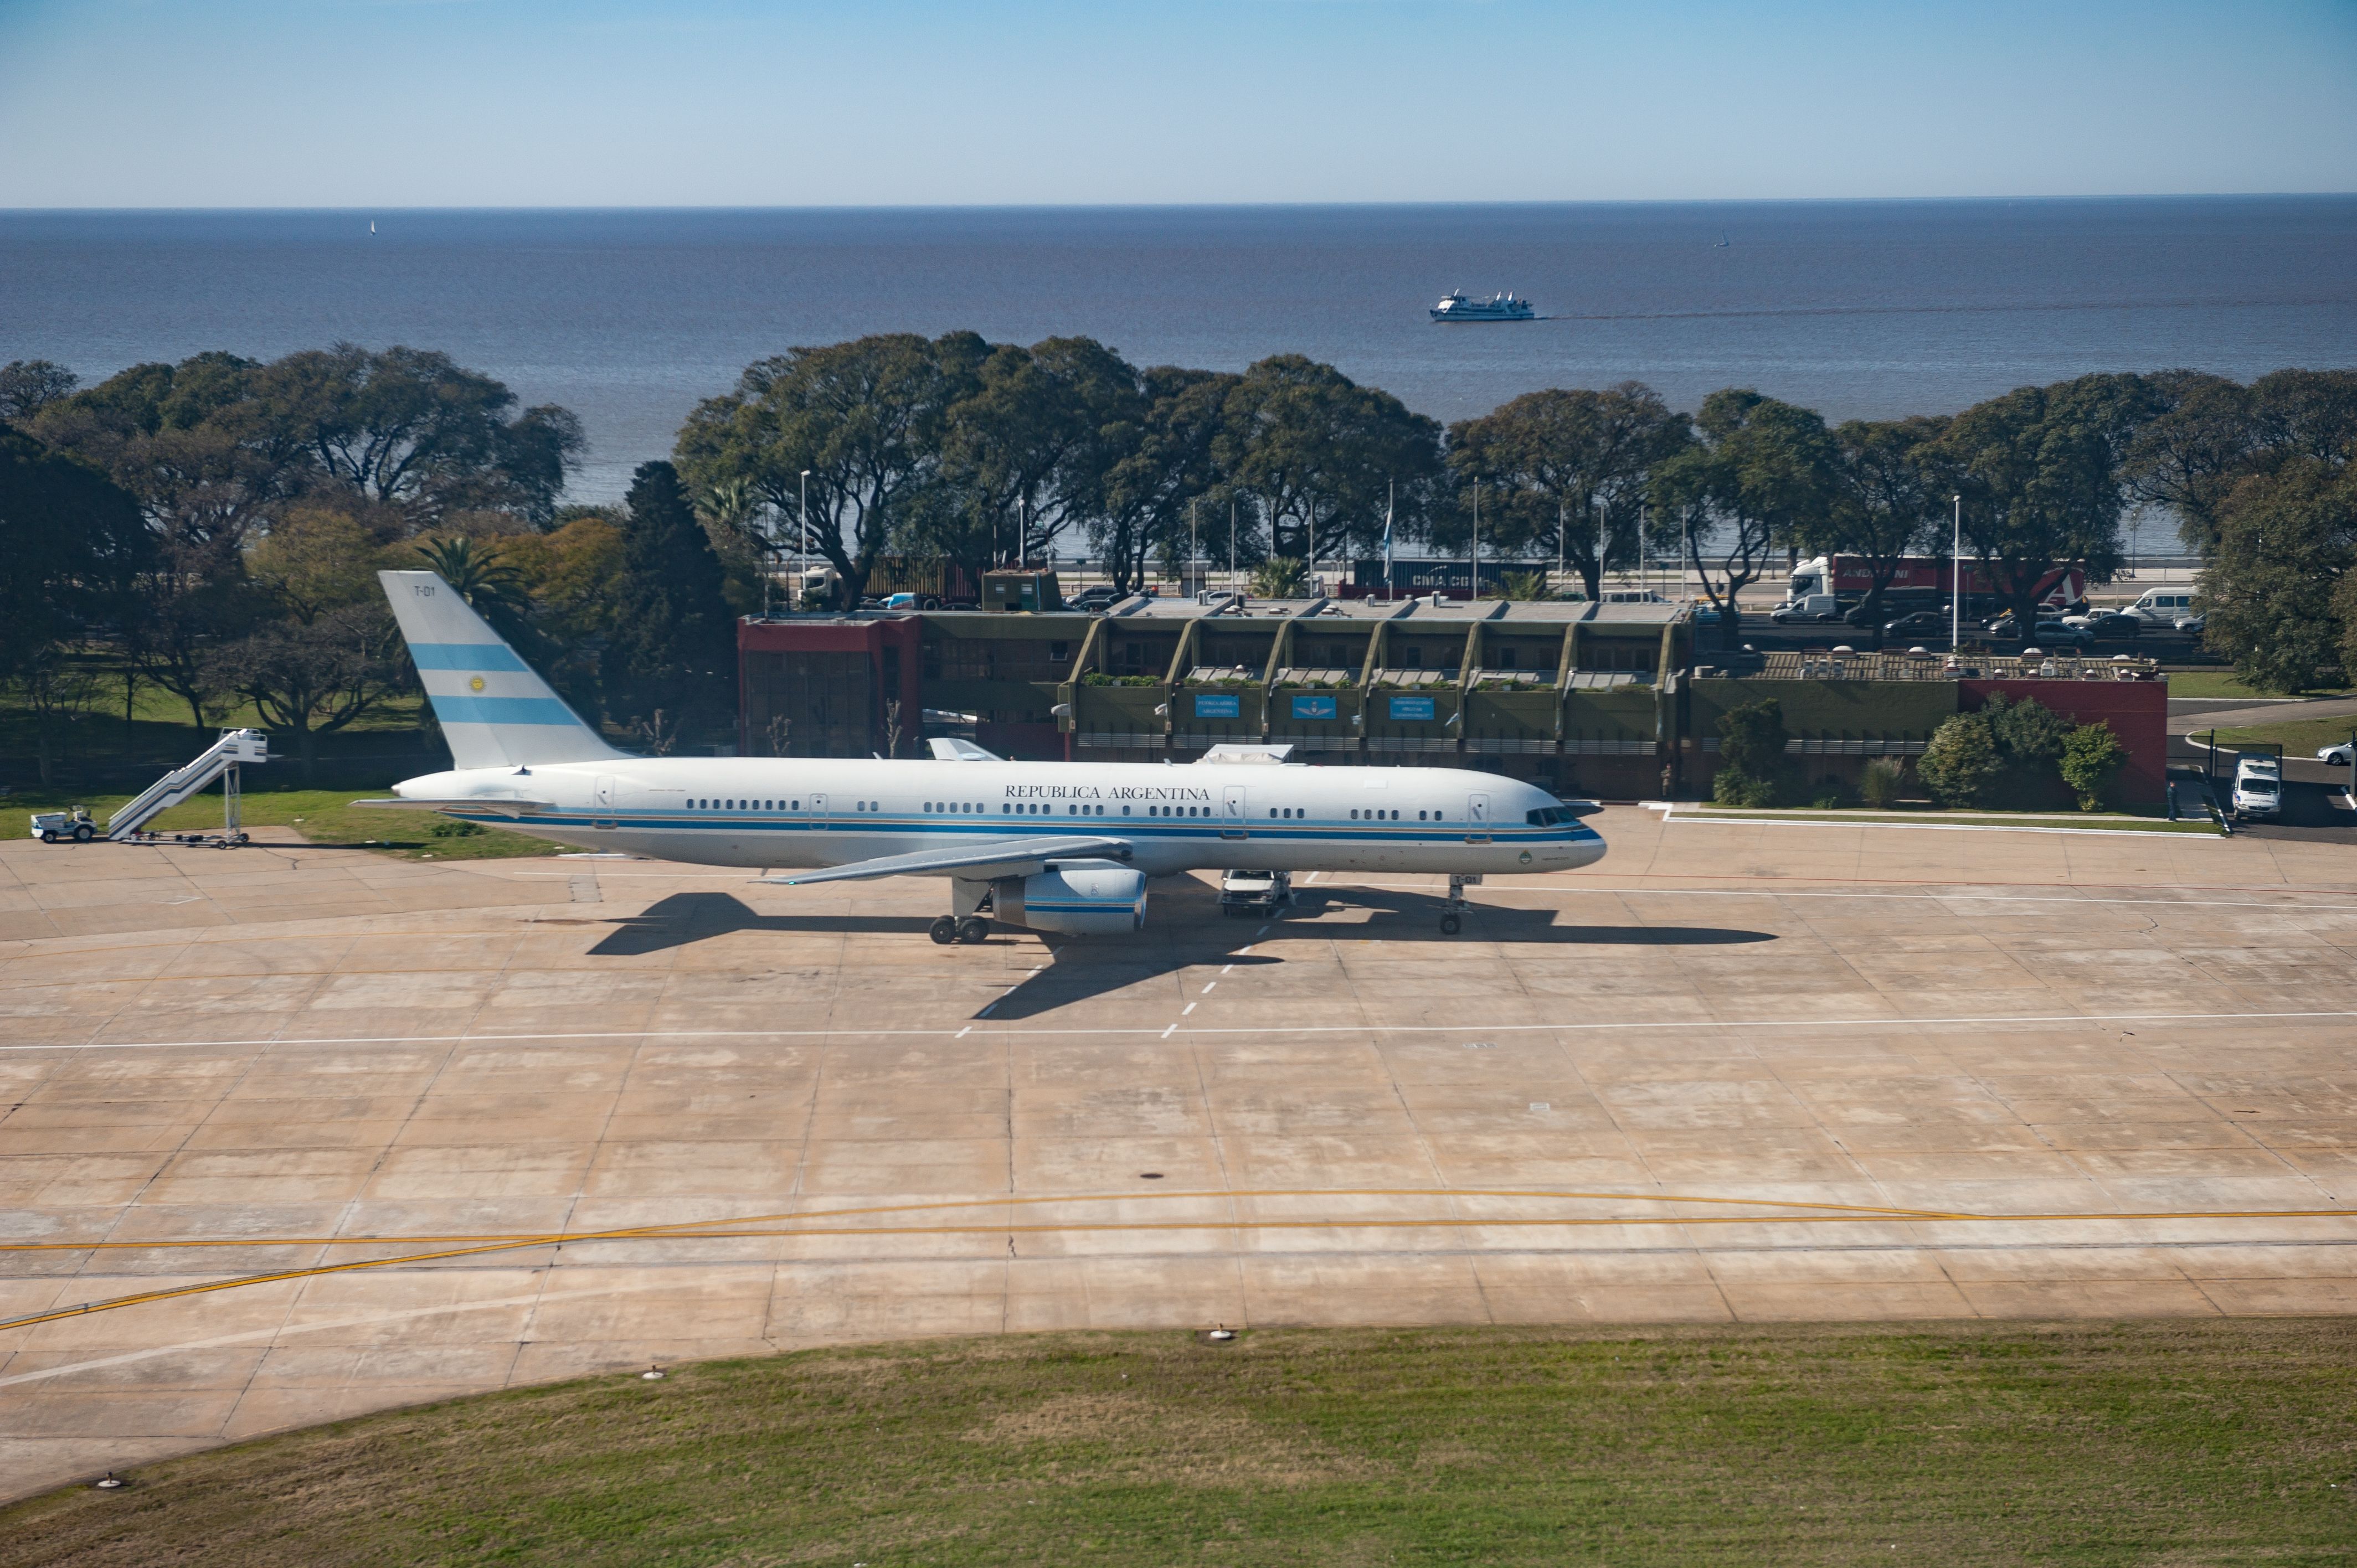 Video: Argentina’s New Boeing 757 Presidential Jet Arrives In Fashion